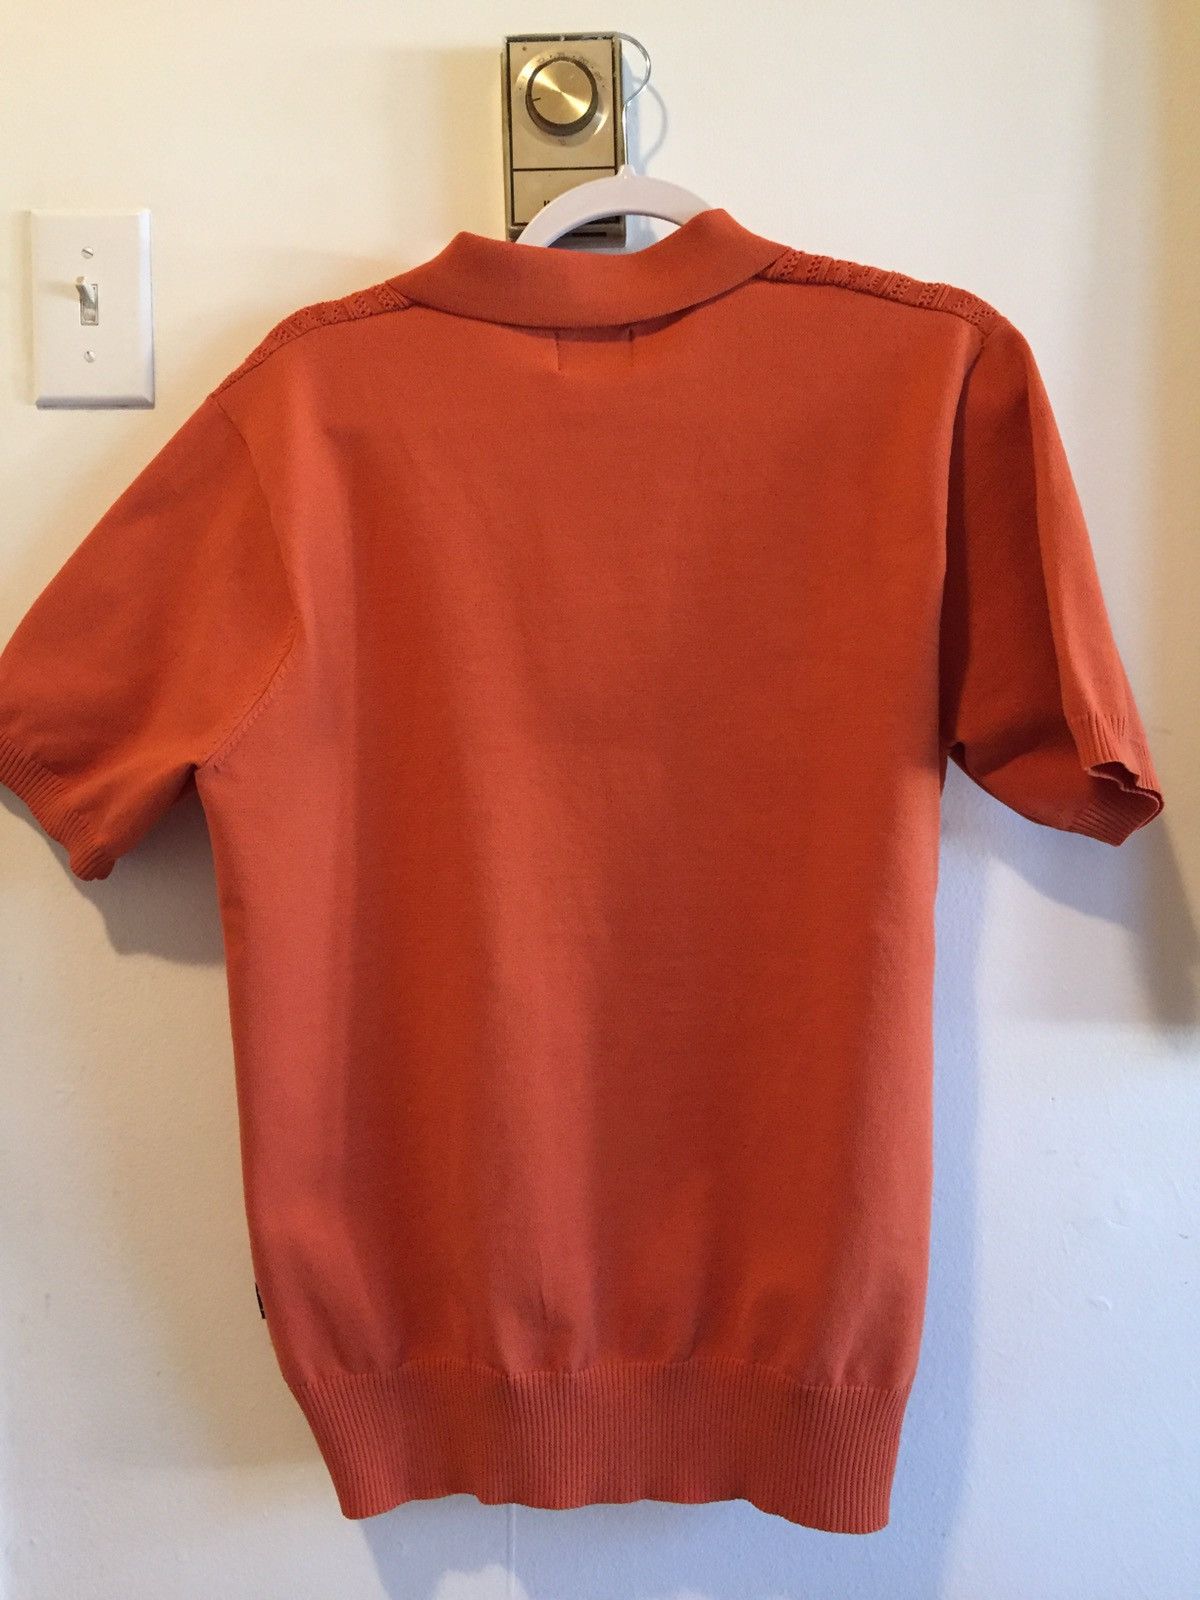 Stussy Stussy orange S cable knit polo shirt | Grailed